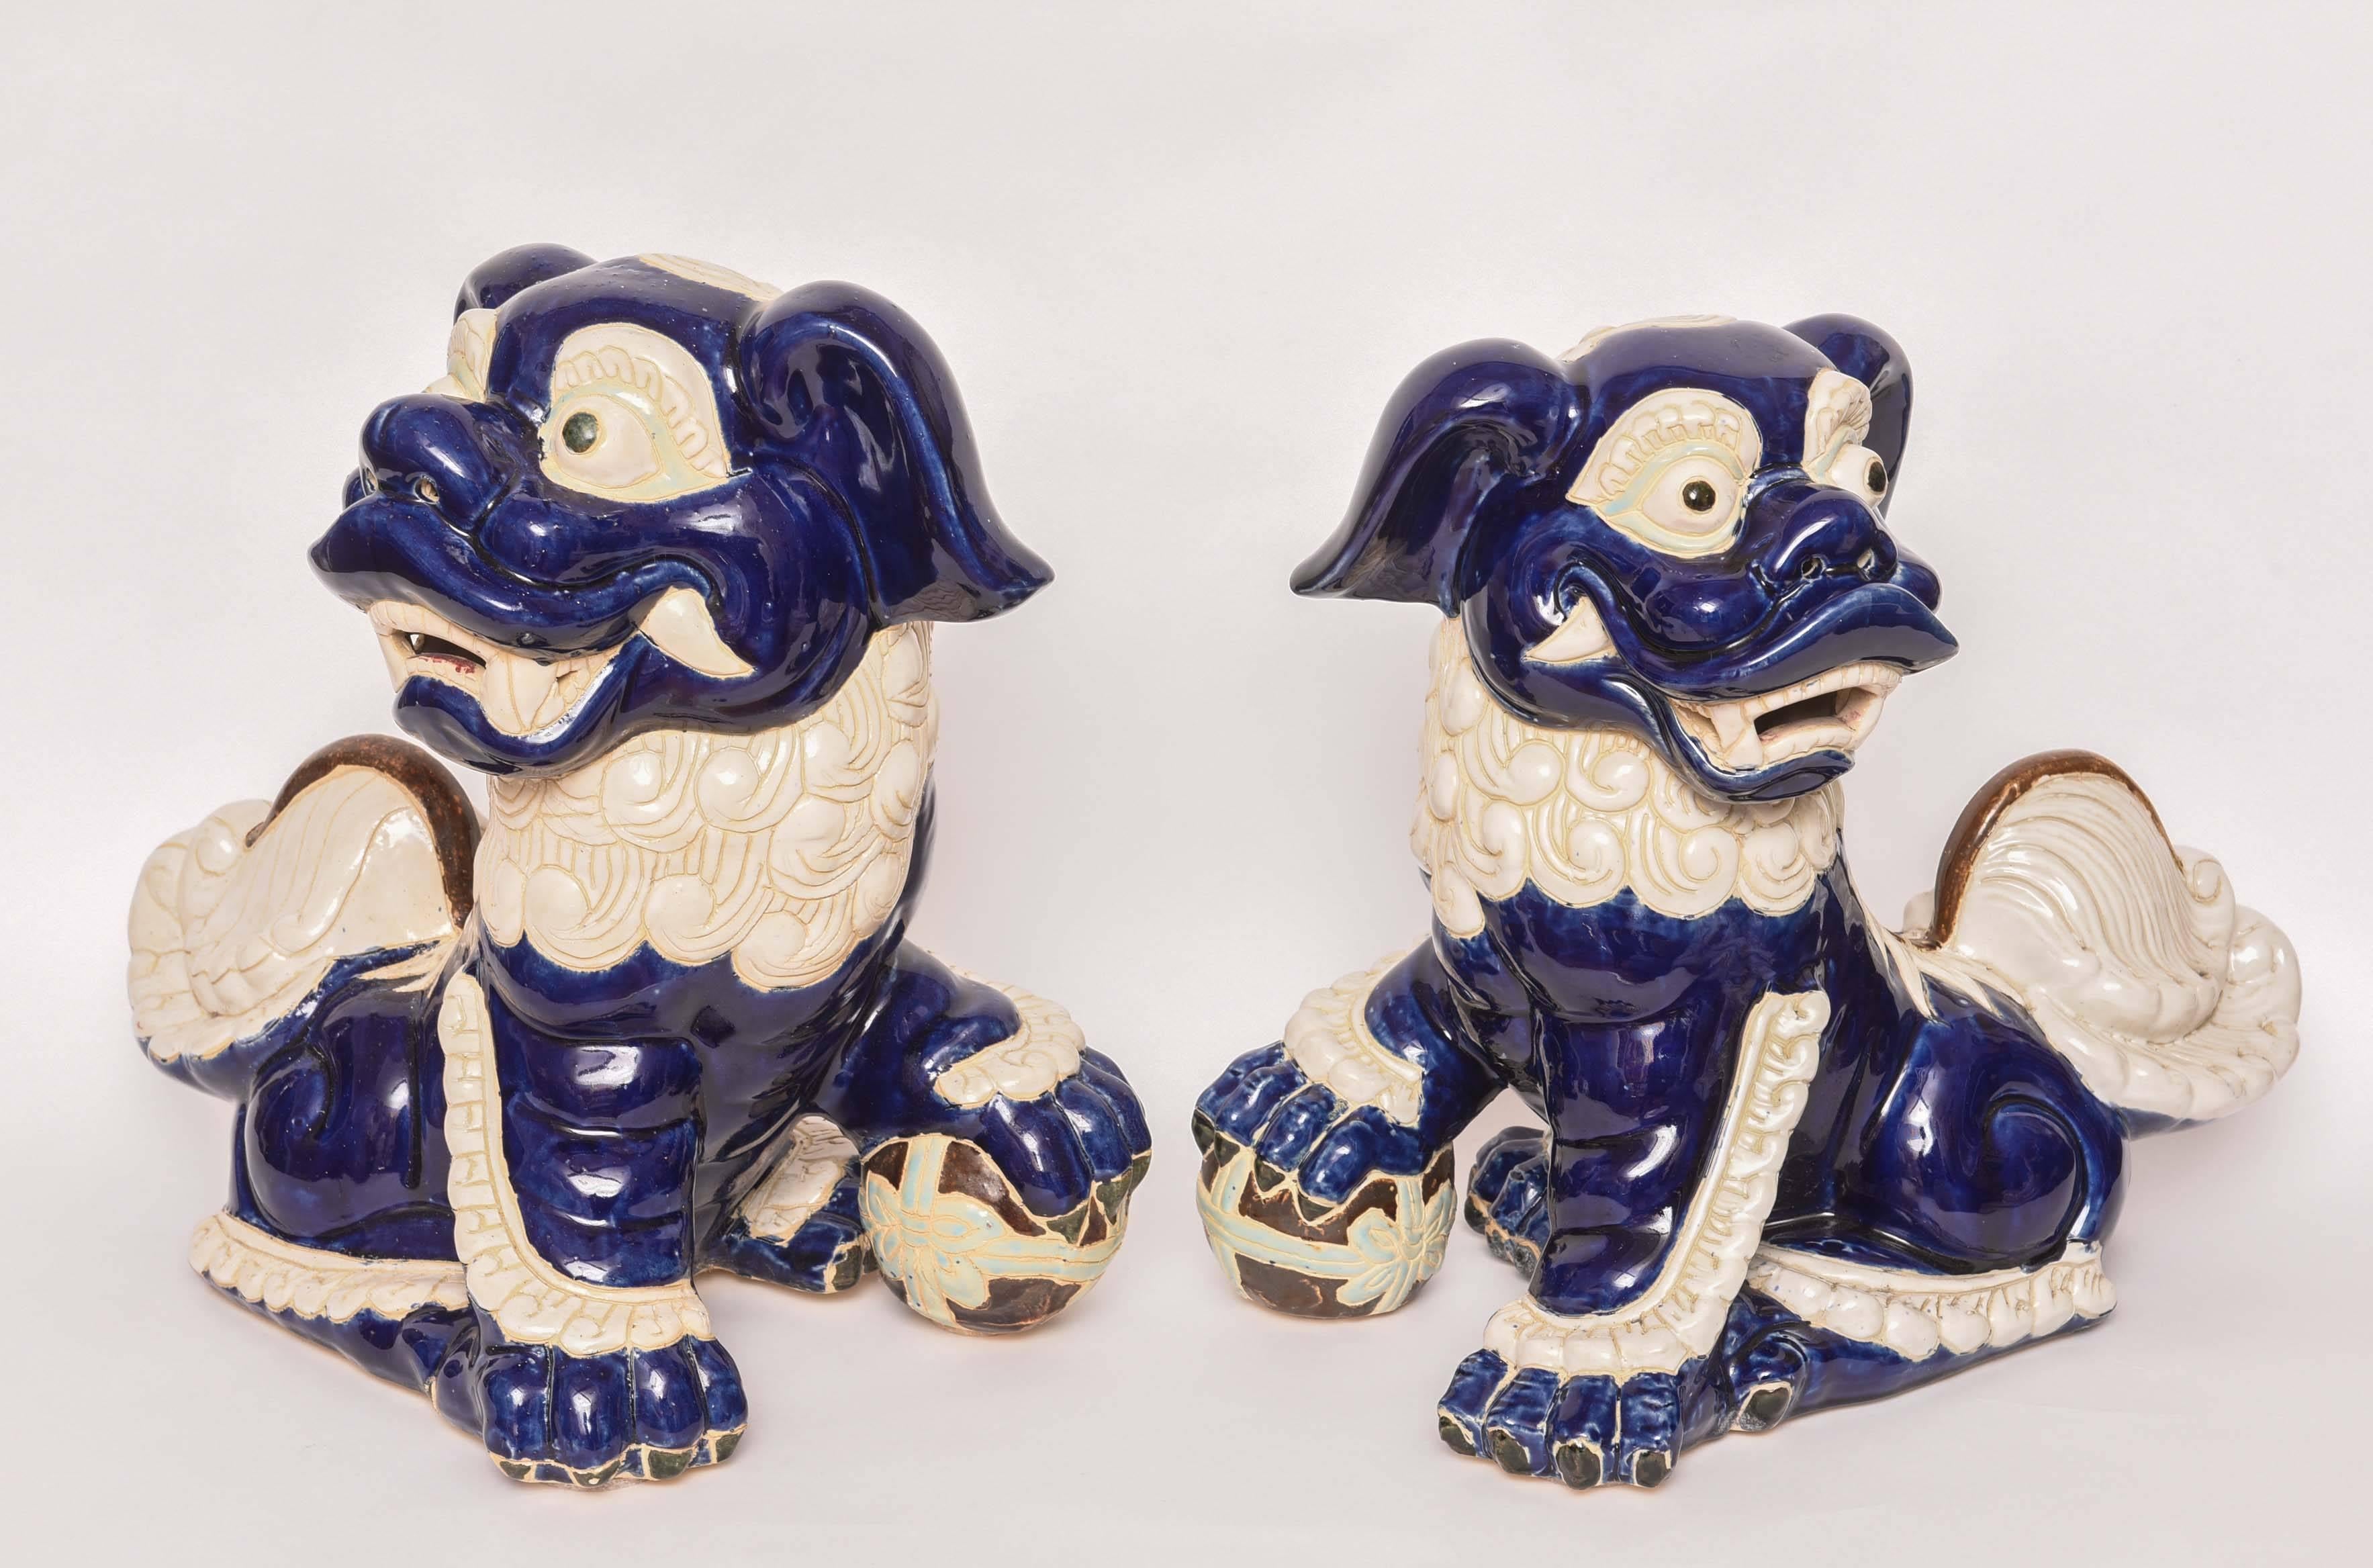 Large pair of vibrant blue and white seated Foo dogs.